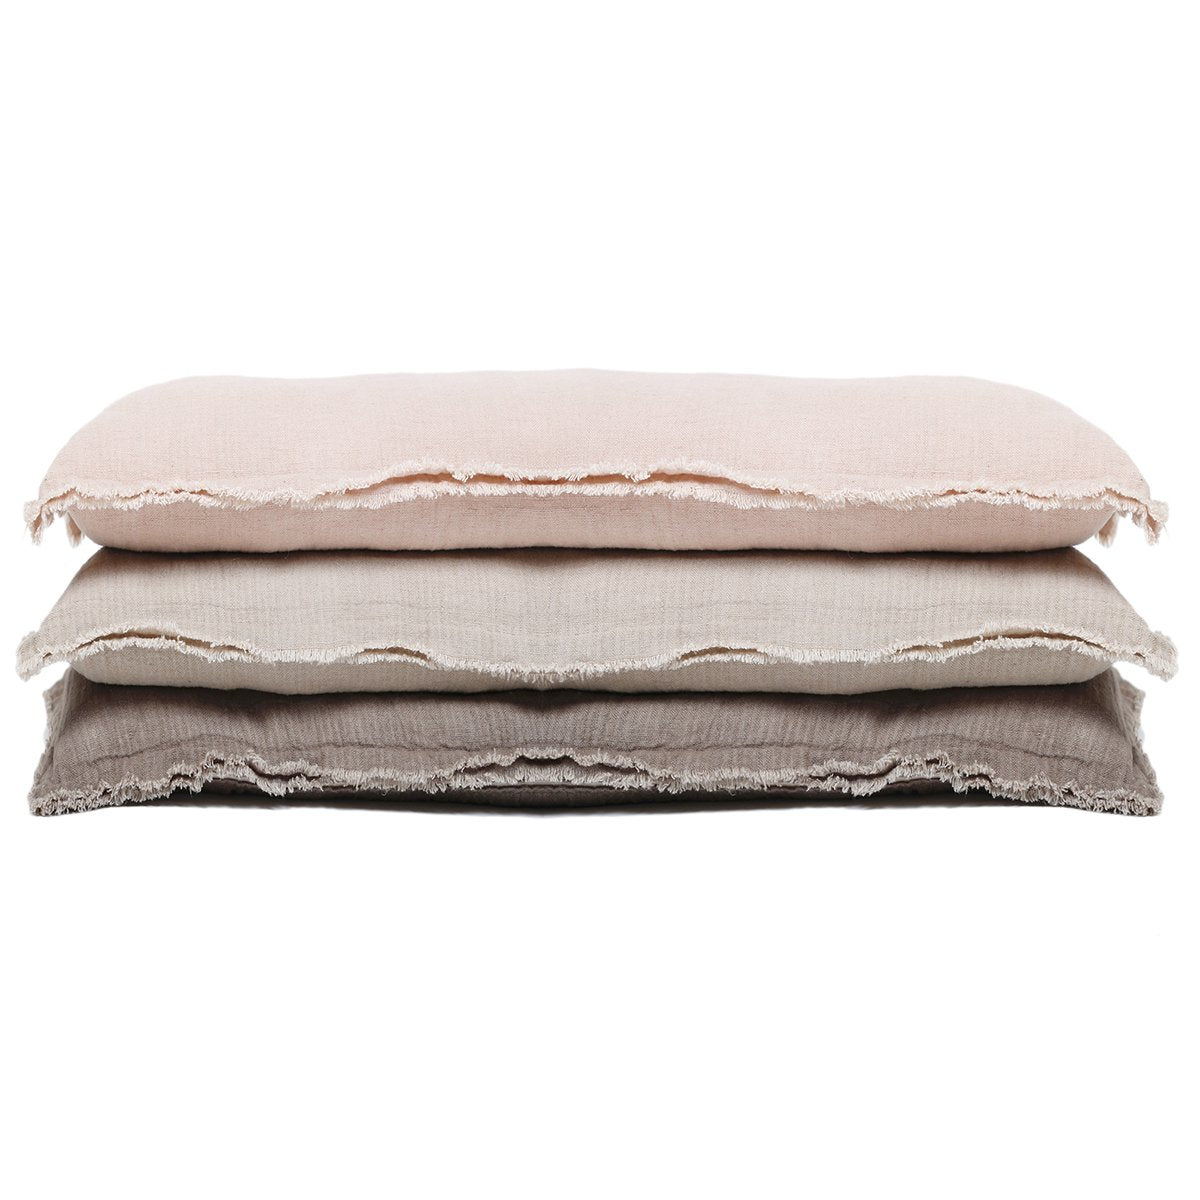 The Laurel Blush 14x40 Pillow with Insert is a beautiful, stonewashed linen with frayed edges.   Details & Care: 100% Linen  Machine Wash cold: tumble dry low: warm iron as needed. Insert Included 